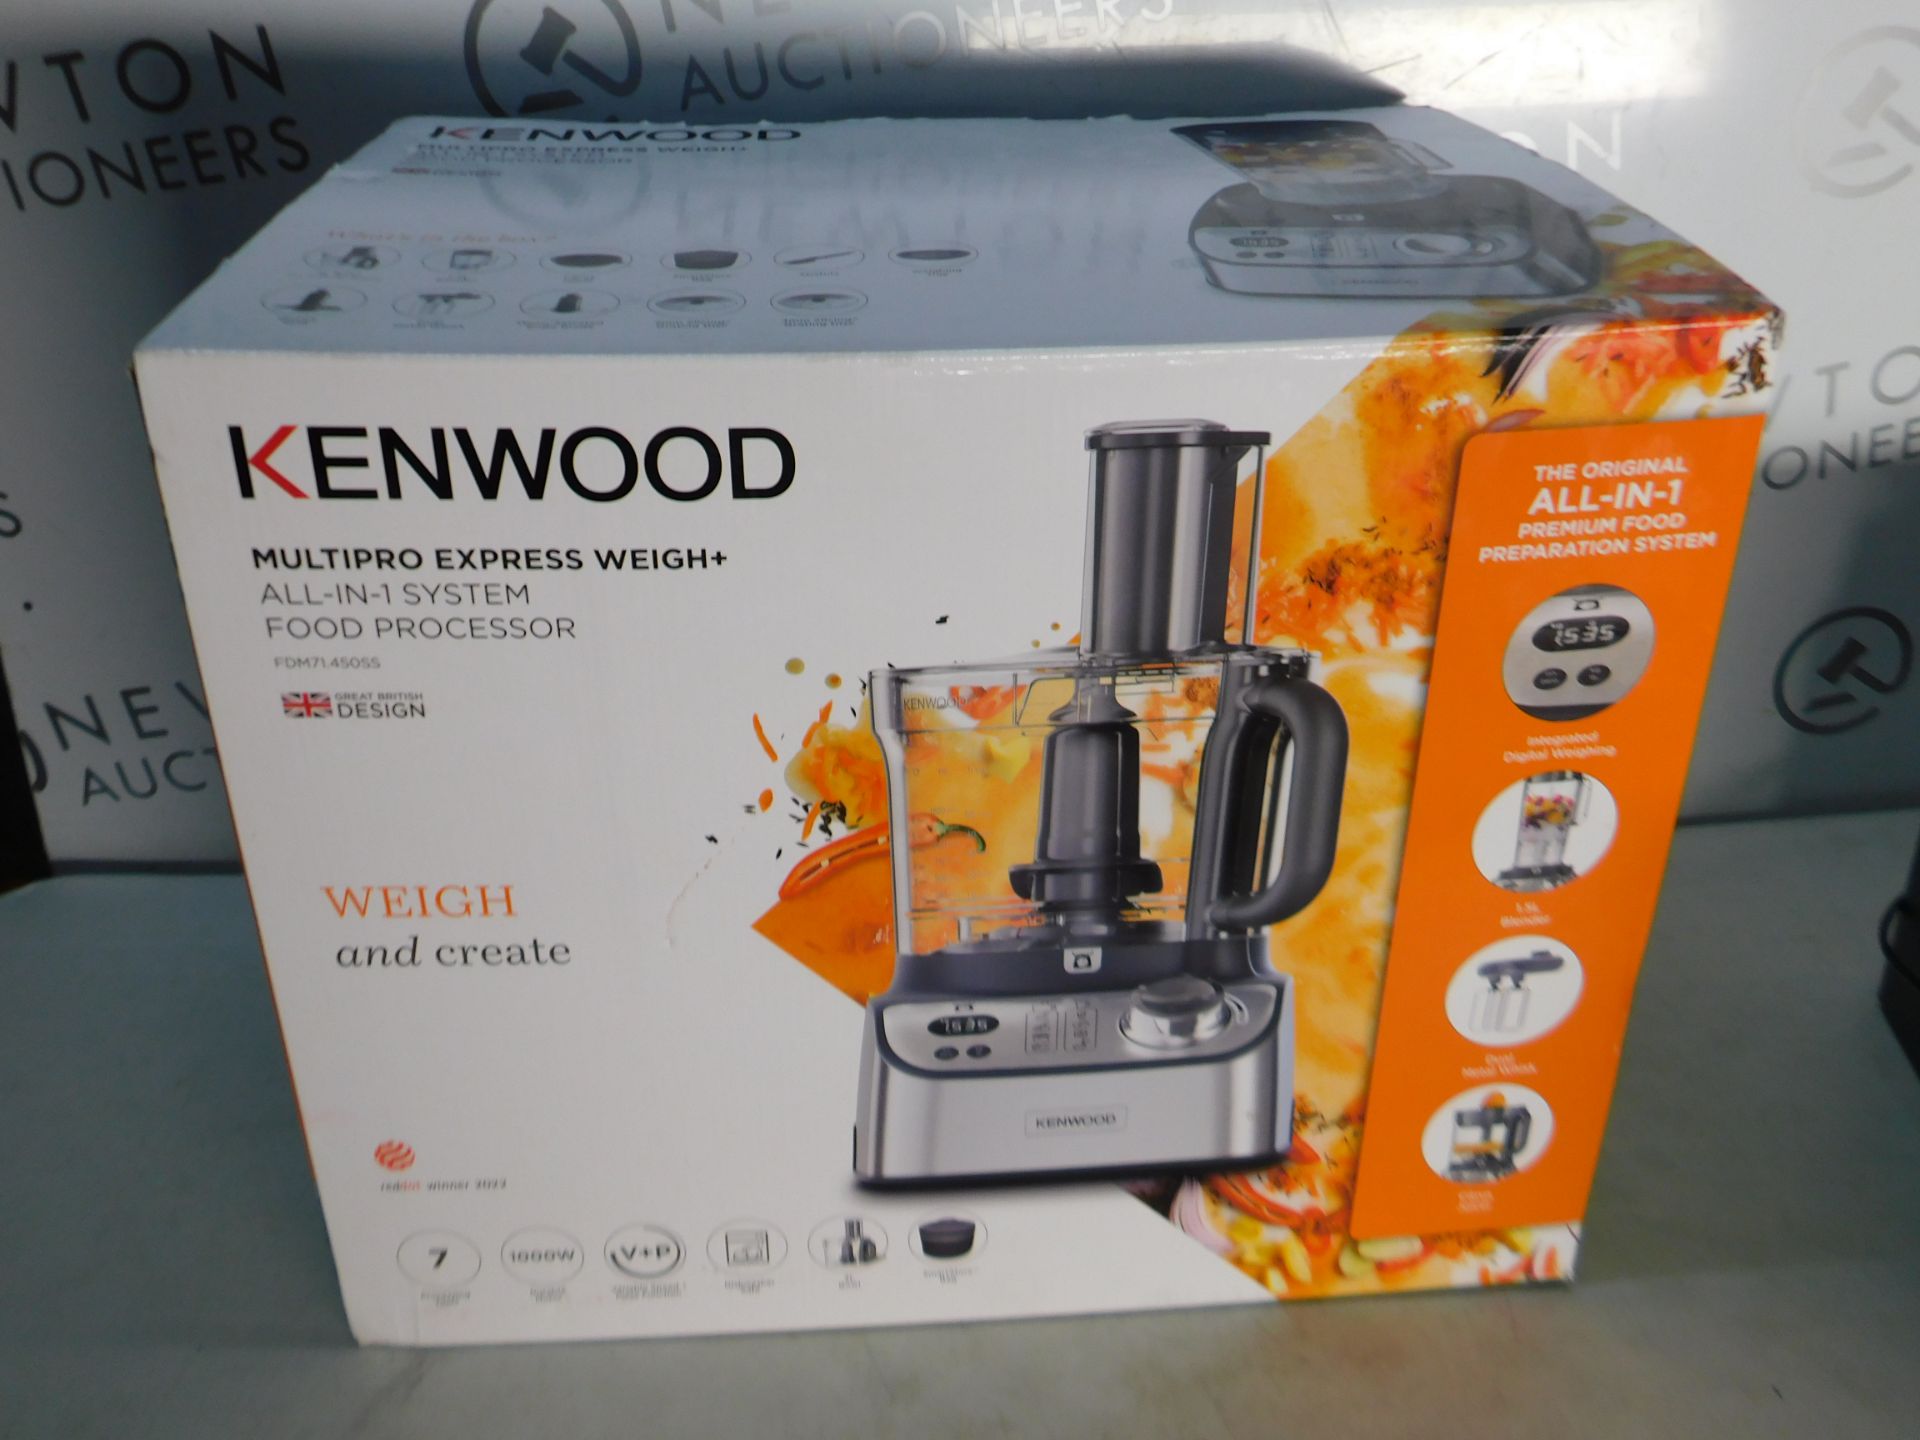 1 BOXED KENWOOD MULTIPRO COMPACT FOOD PROCESSOR, FDM71.450 RRP £139.99